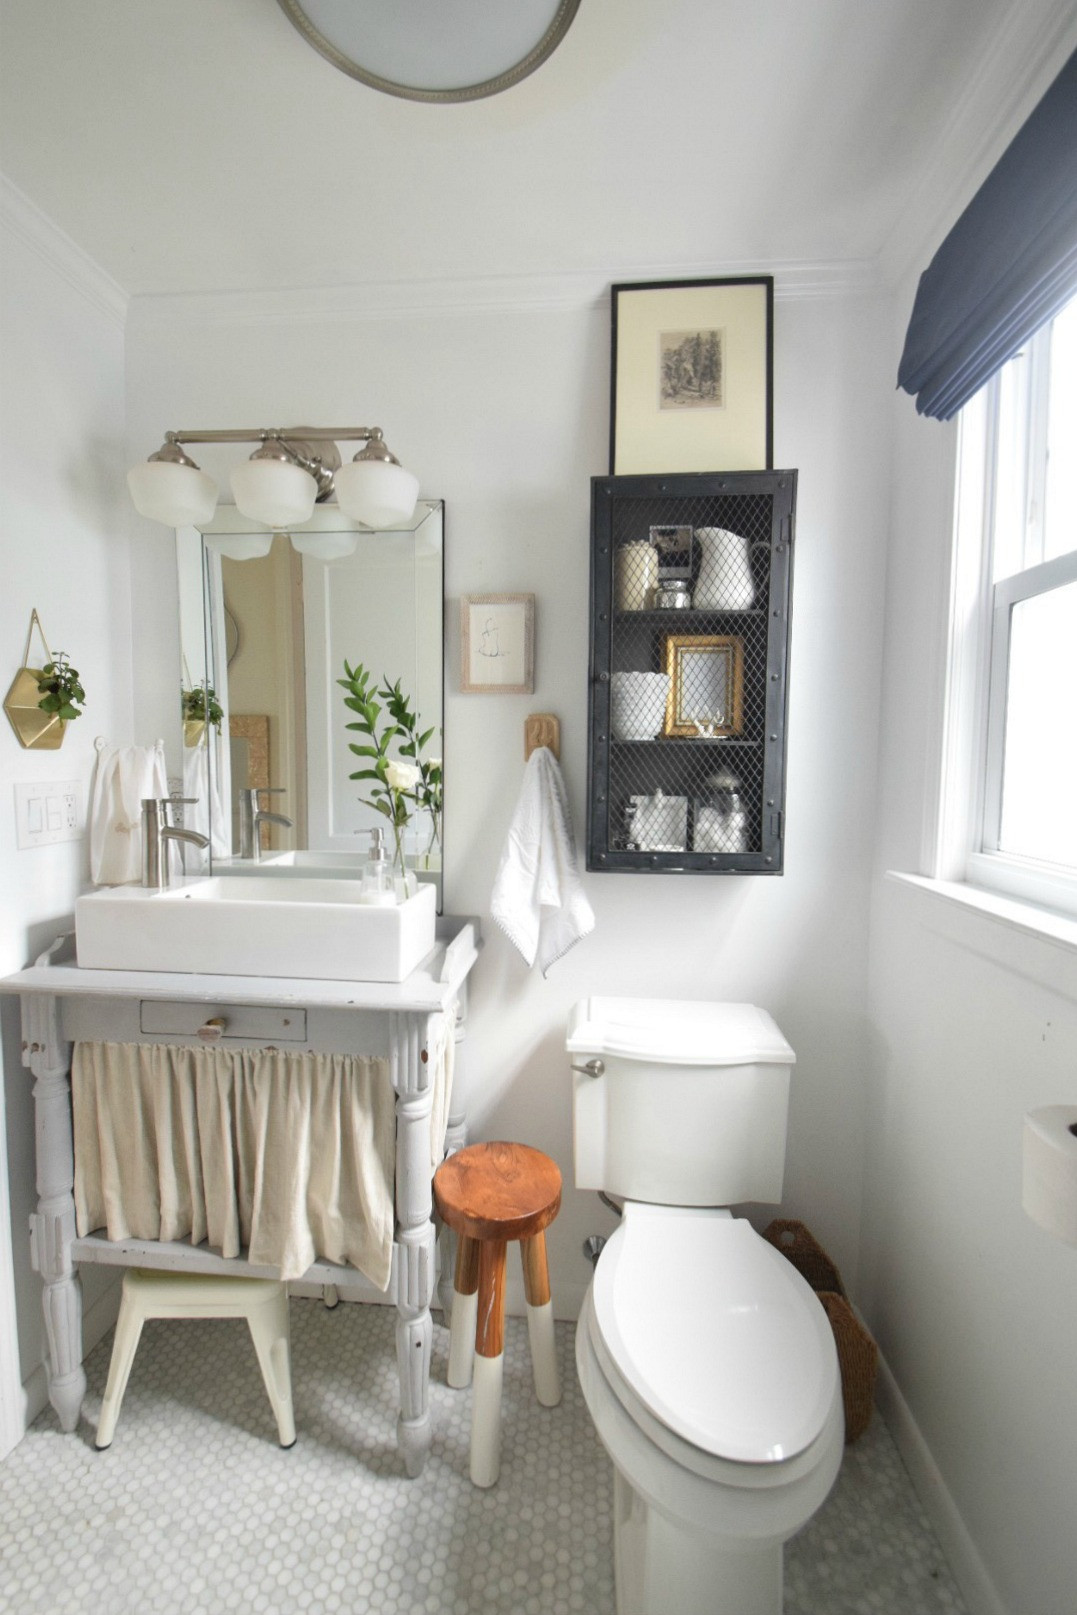 Small Bathroom Decorations
 Small Bathroom Ideas and Solutions in our Tiny Cape